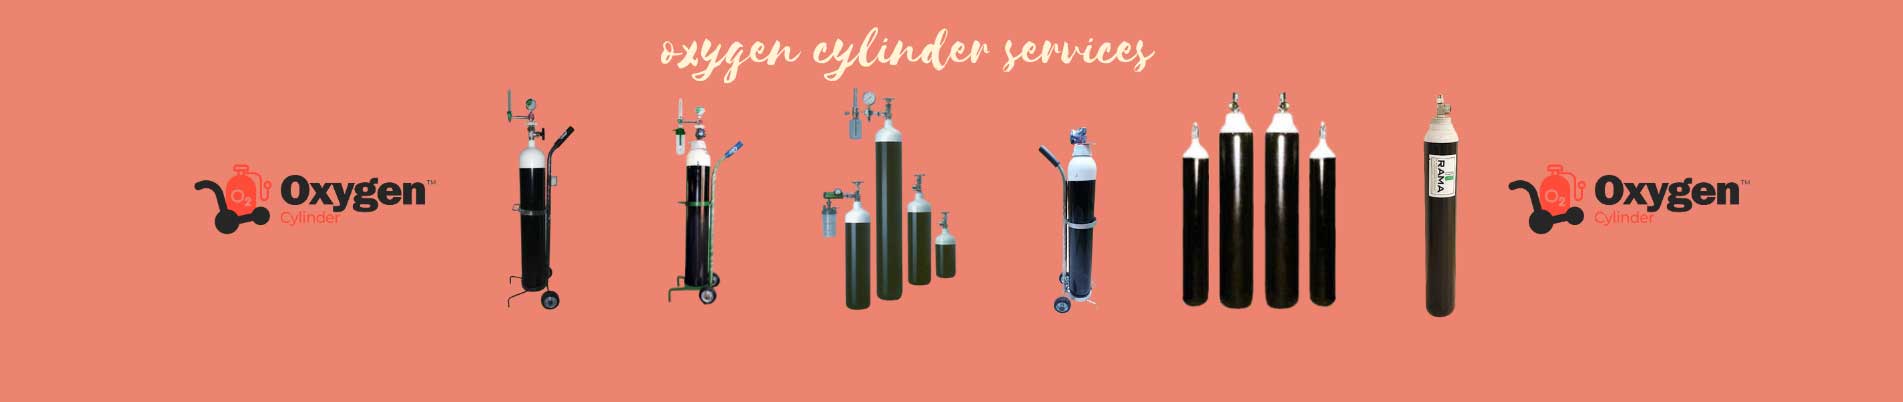 About us oxygen cylinder services